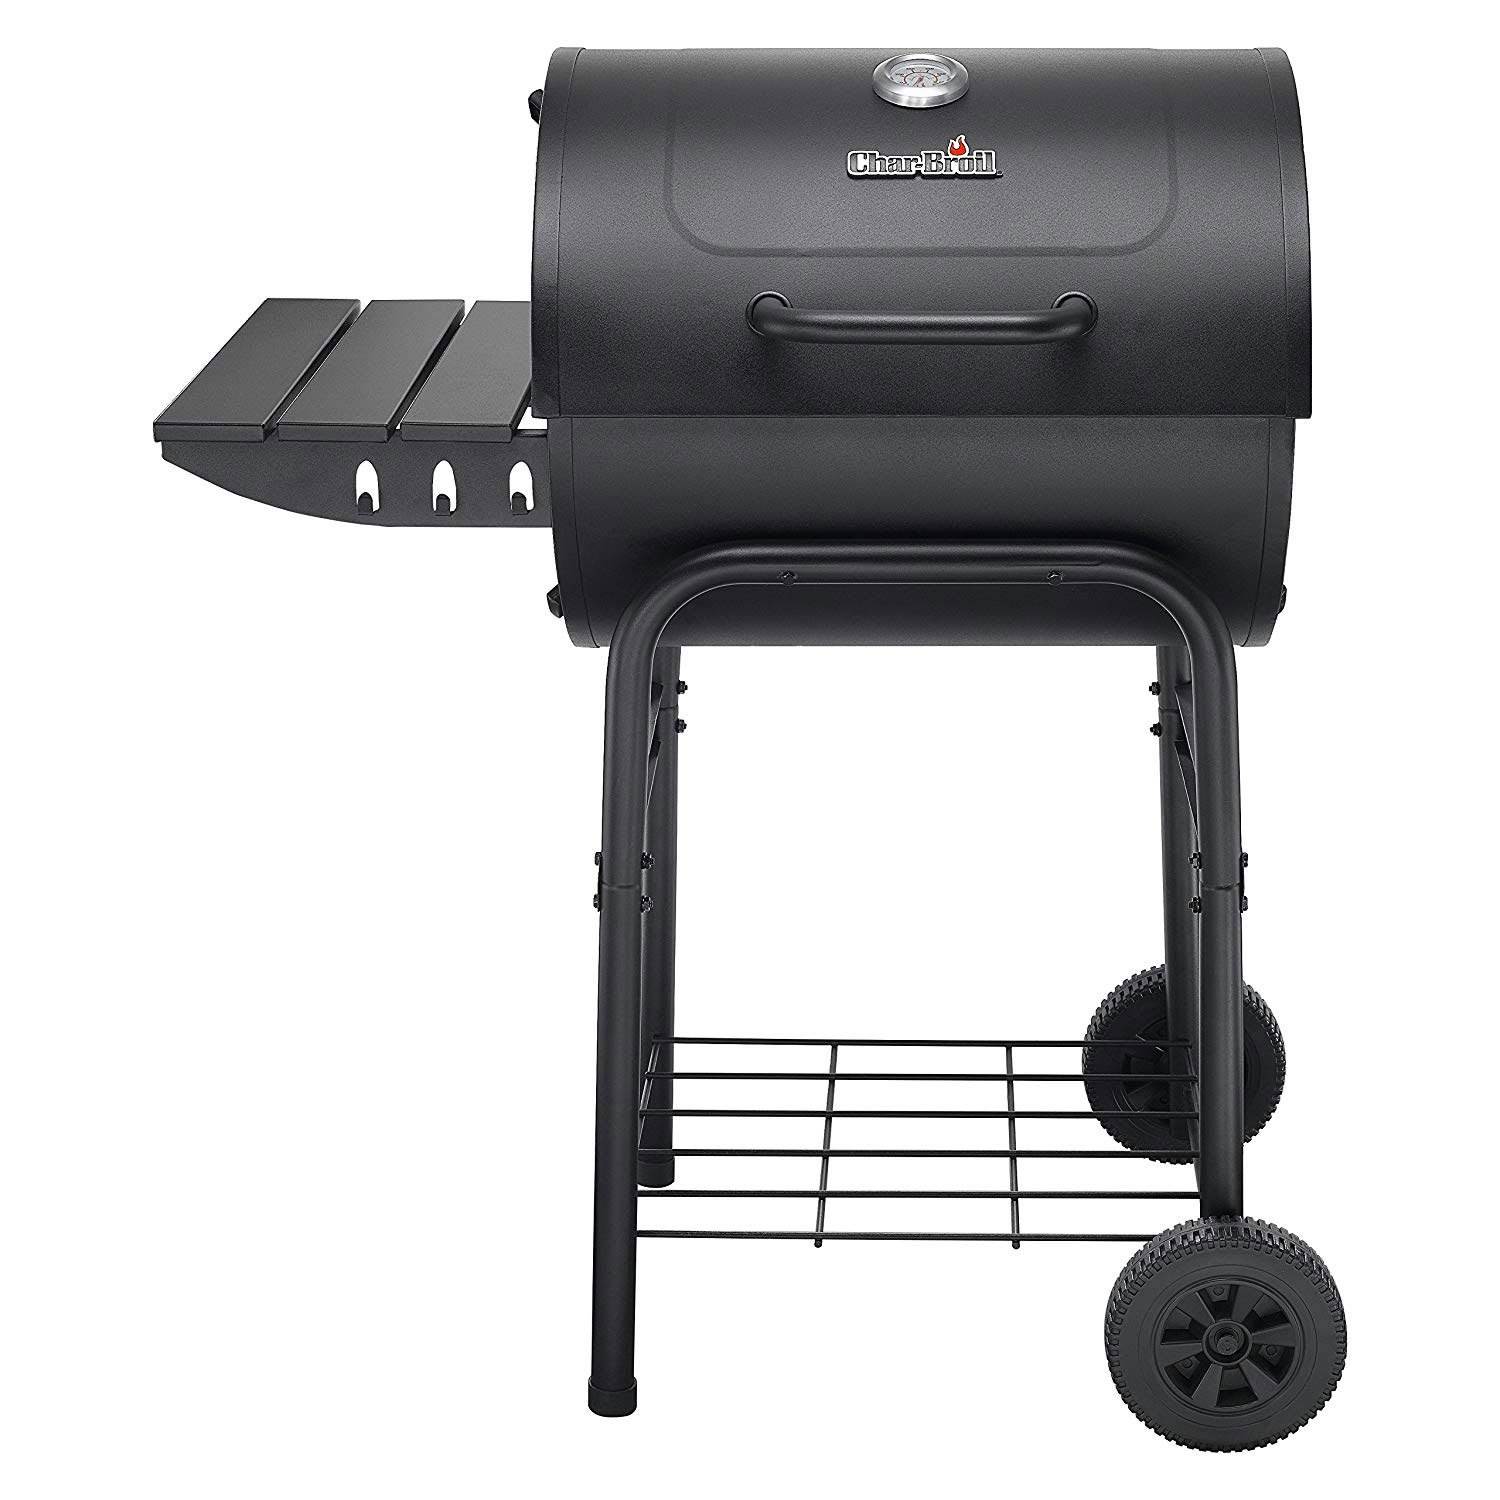 Char-Broil American Gourmet 17302055 625 Square Inch Cast Iron Charcoal Grill - image 5 of 5